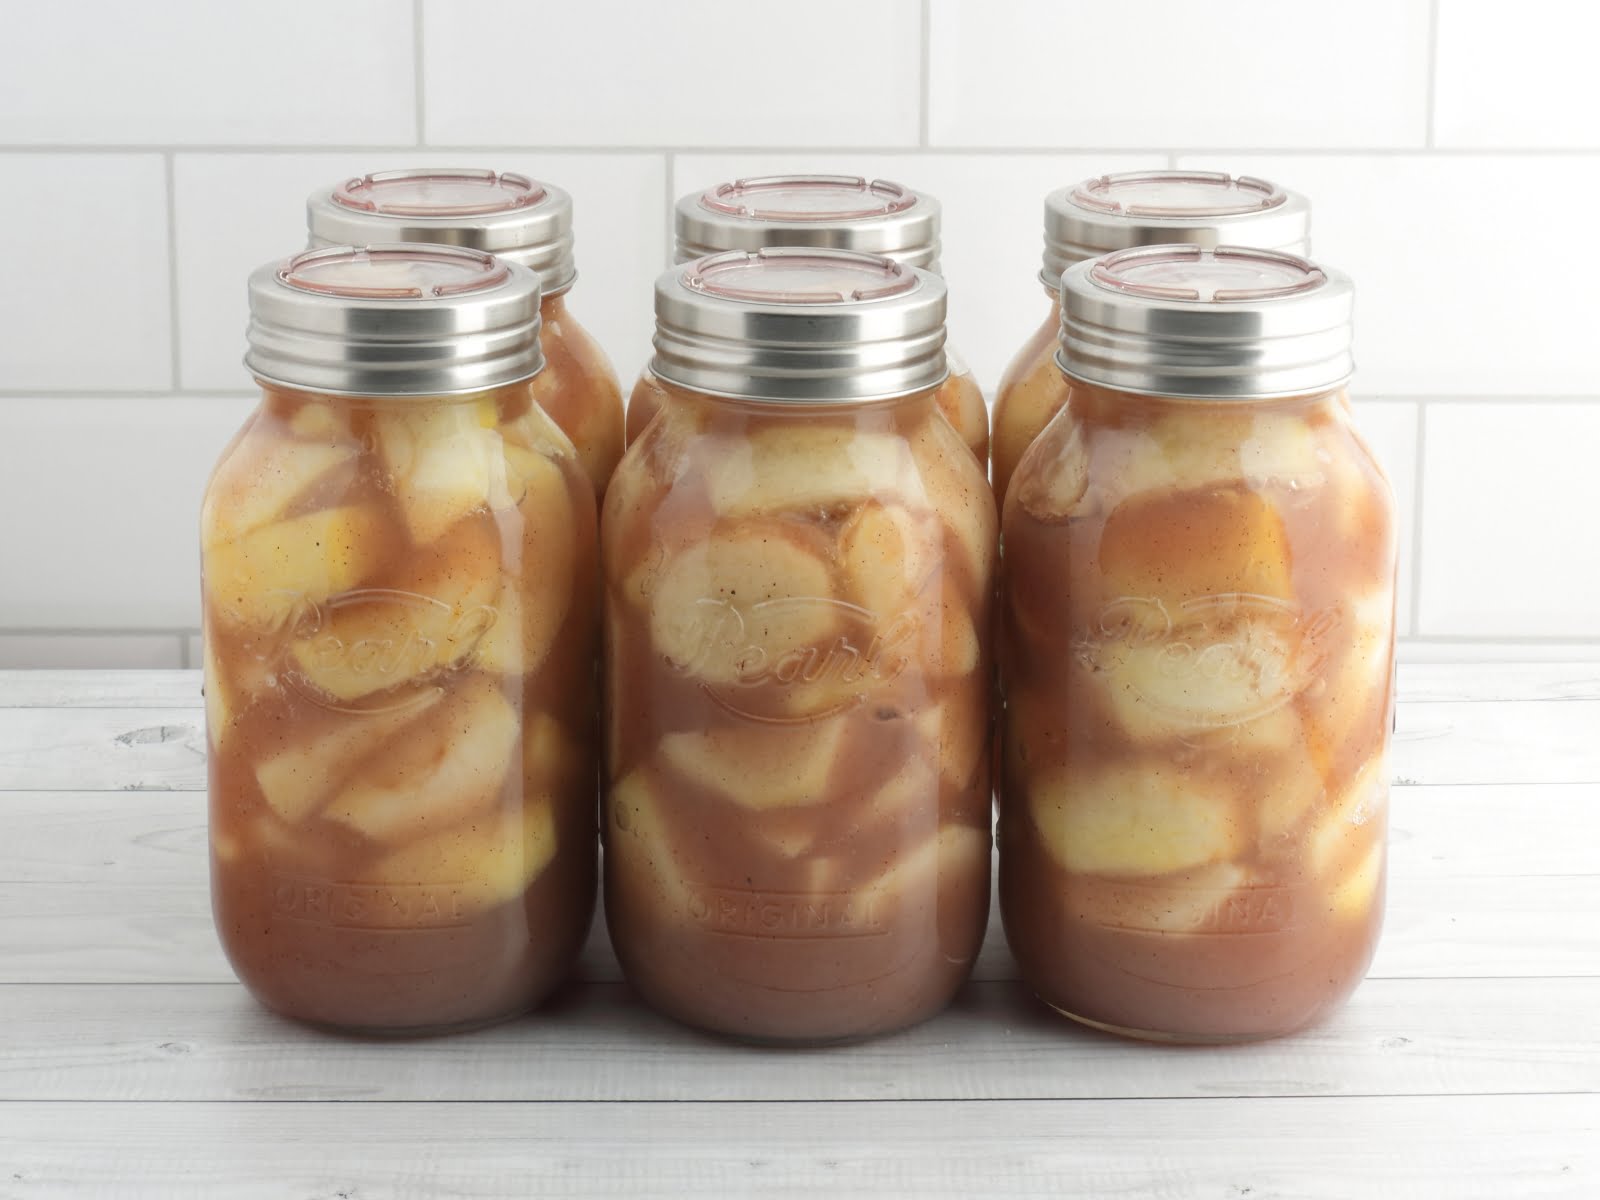 Apple pie filling recipe for canning